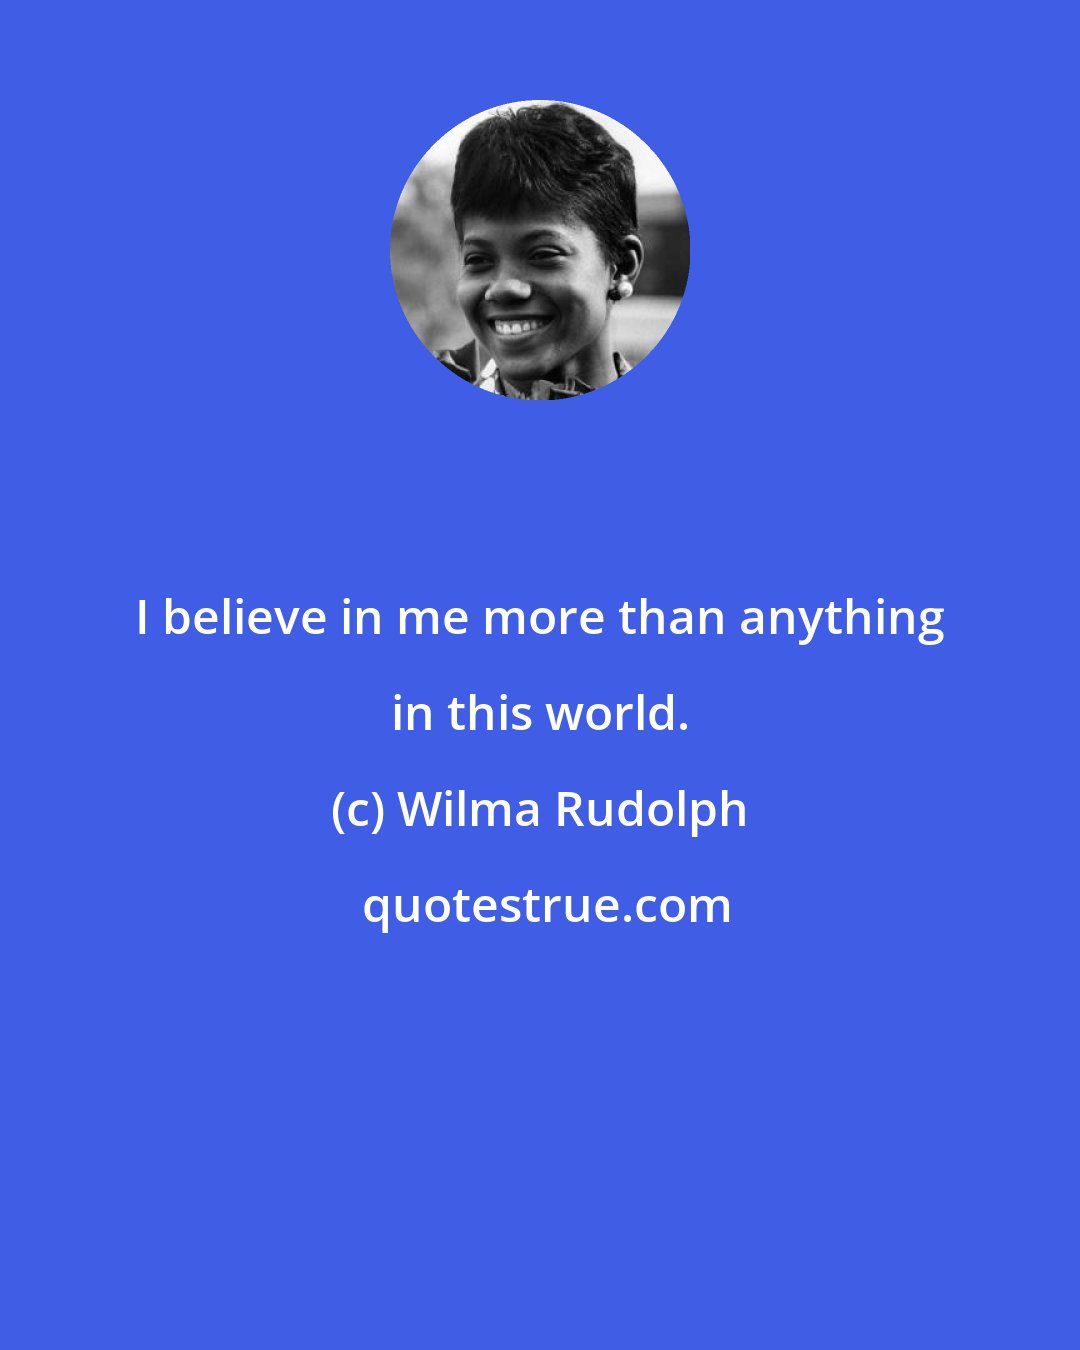 Wilma Rudolph: I believe in me more than anything in this world.